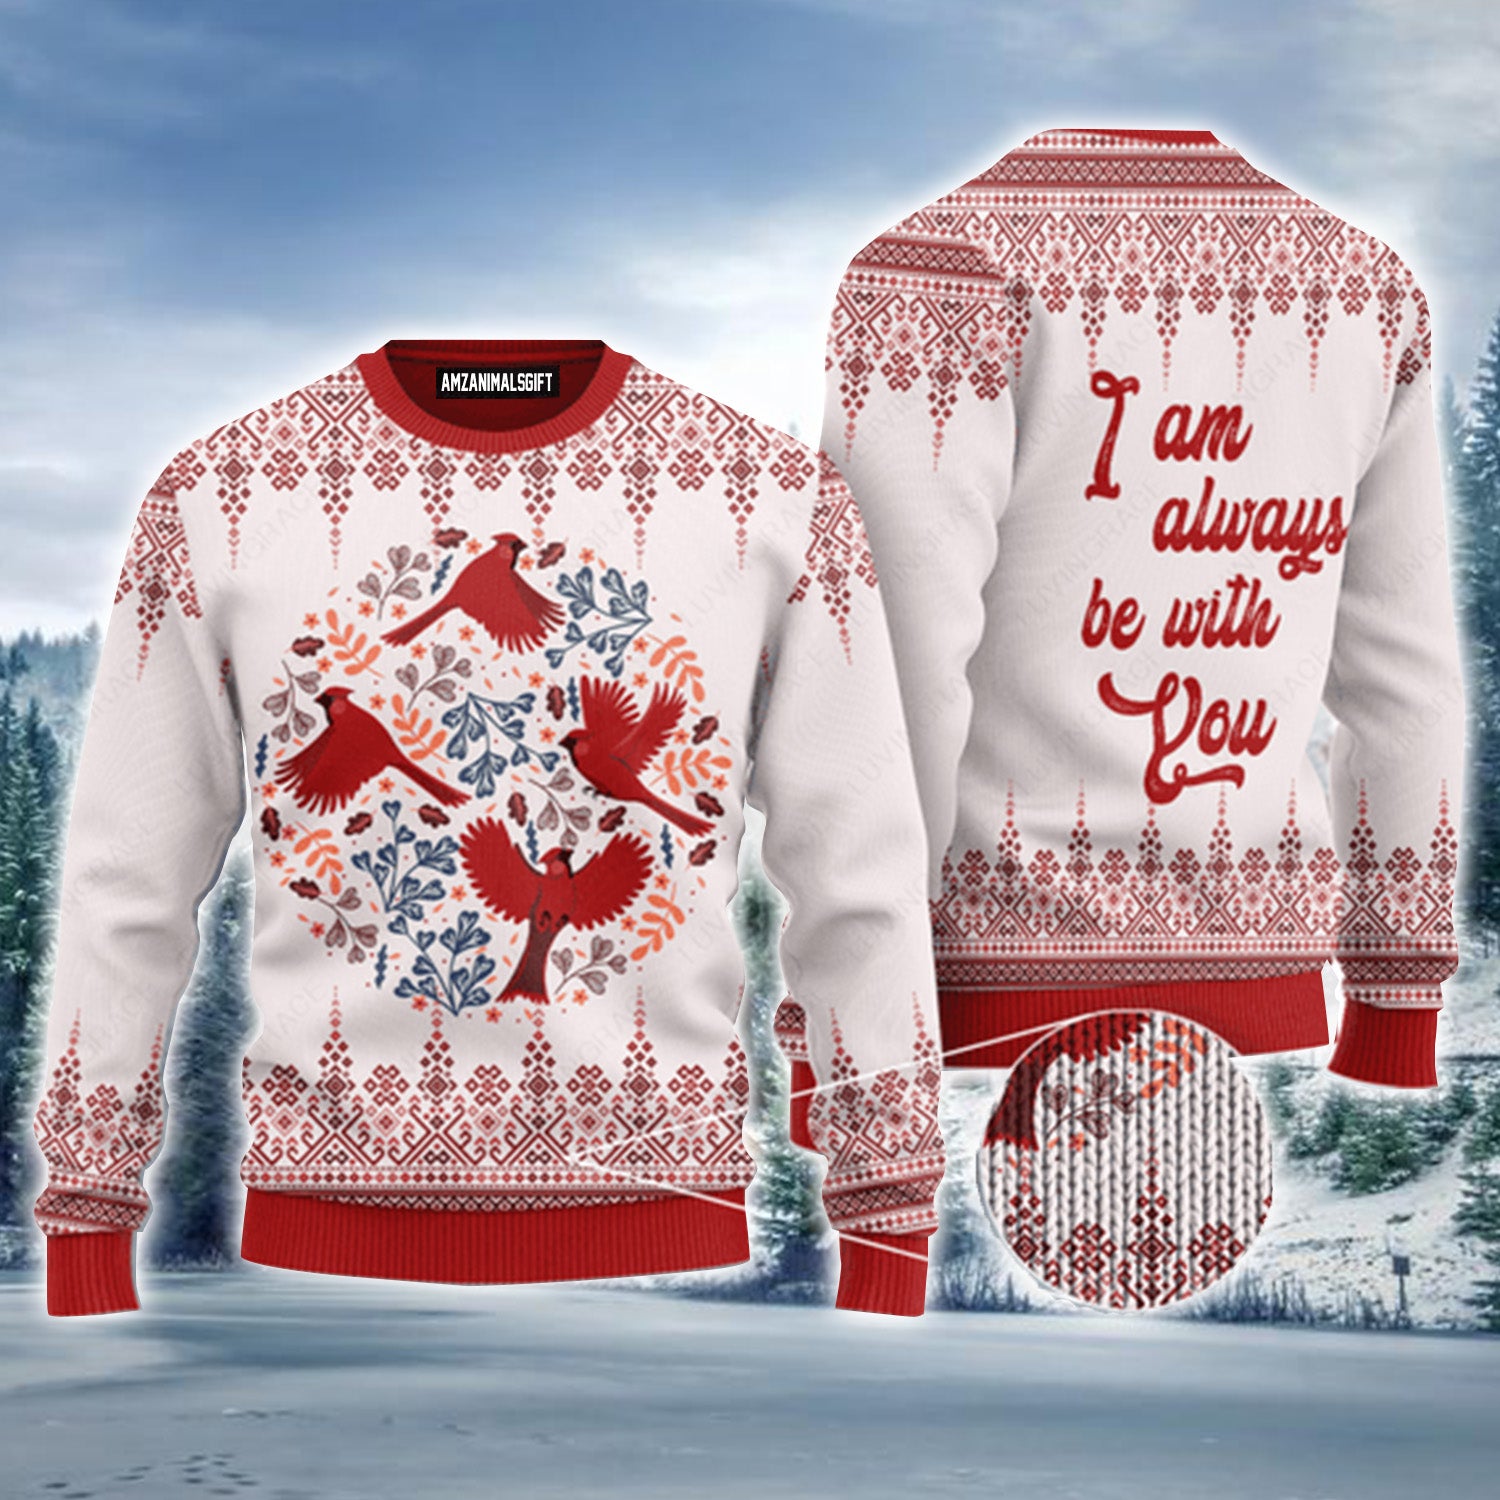 Christmas Cardinal I Am Always Be With You Urly Sweater, Christmas Sweater For Men & Women - Perfect Gift For Christmas, New Year, Winter